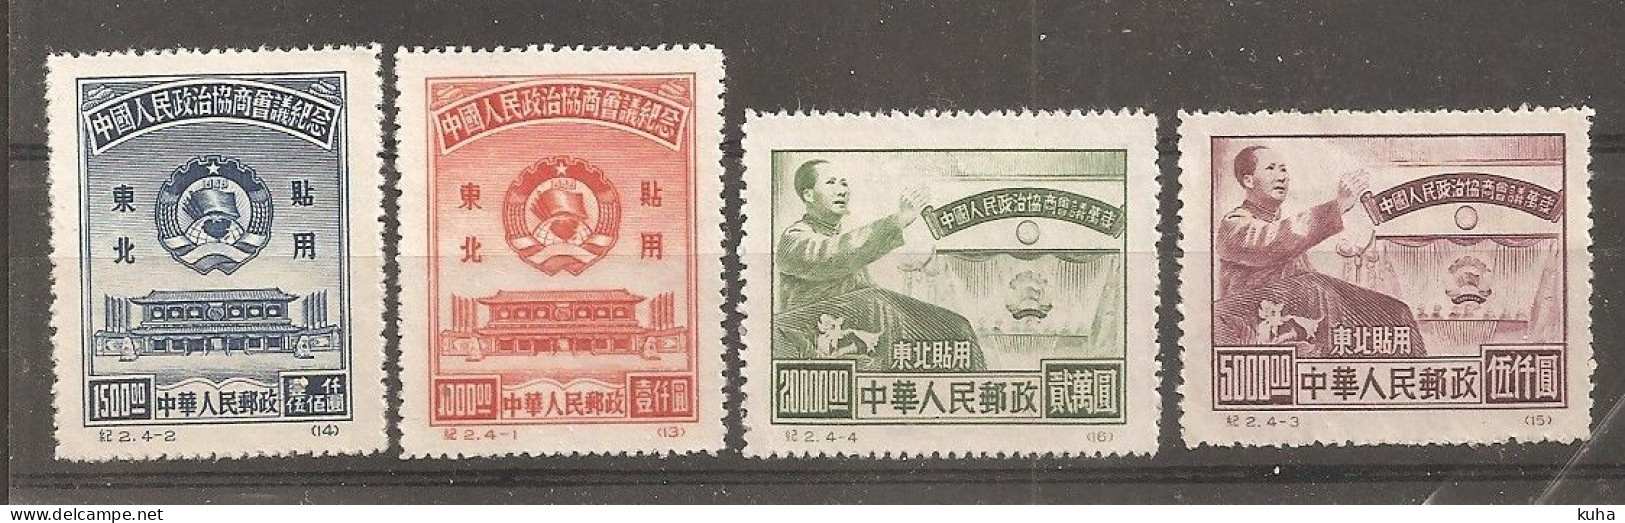 China Chine  MNH 1950 Nord-East - Chine Du Nord-Est 1946-48